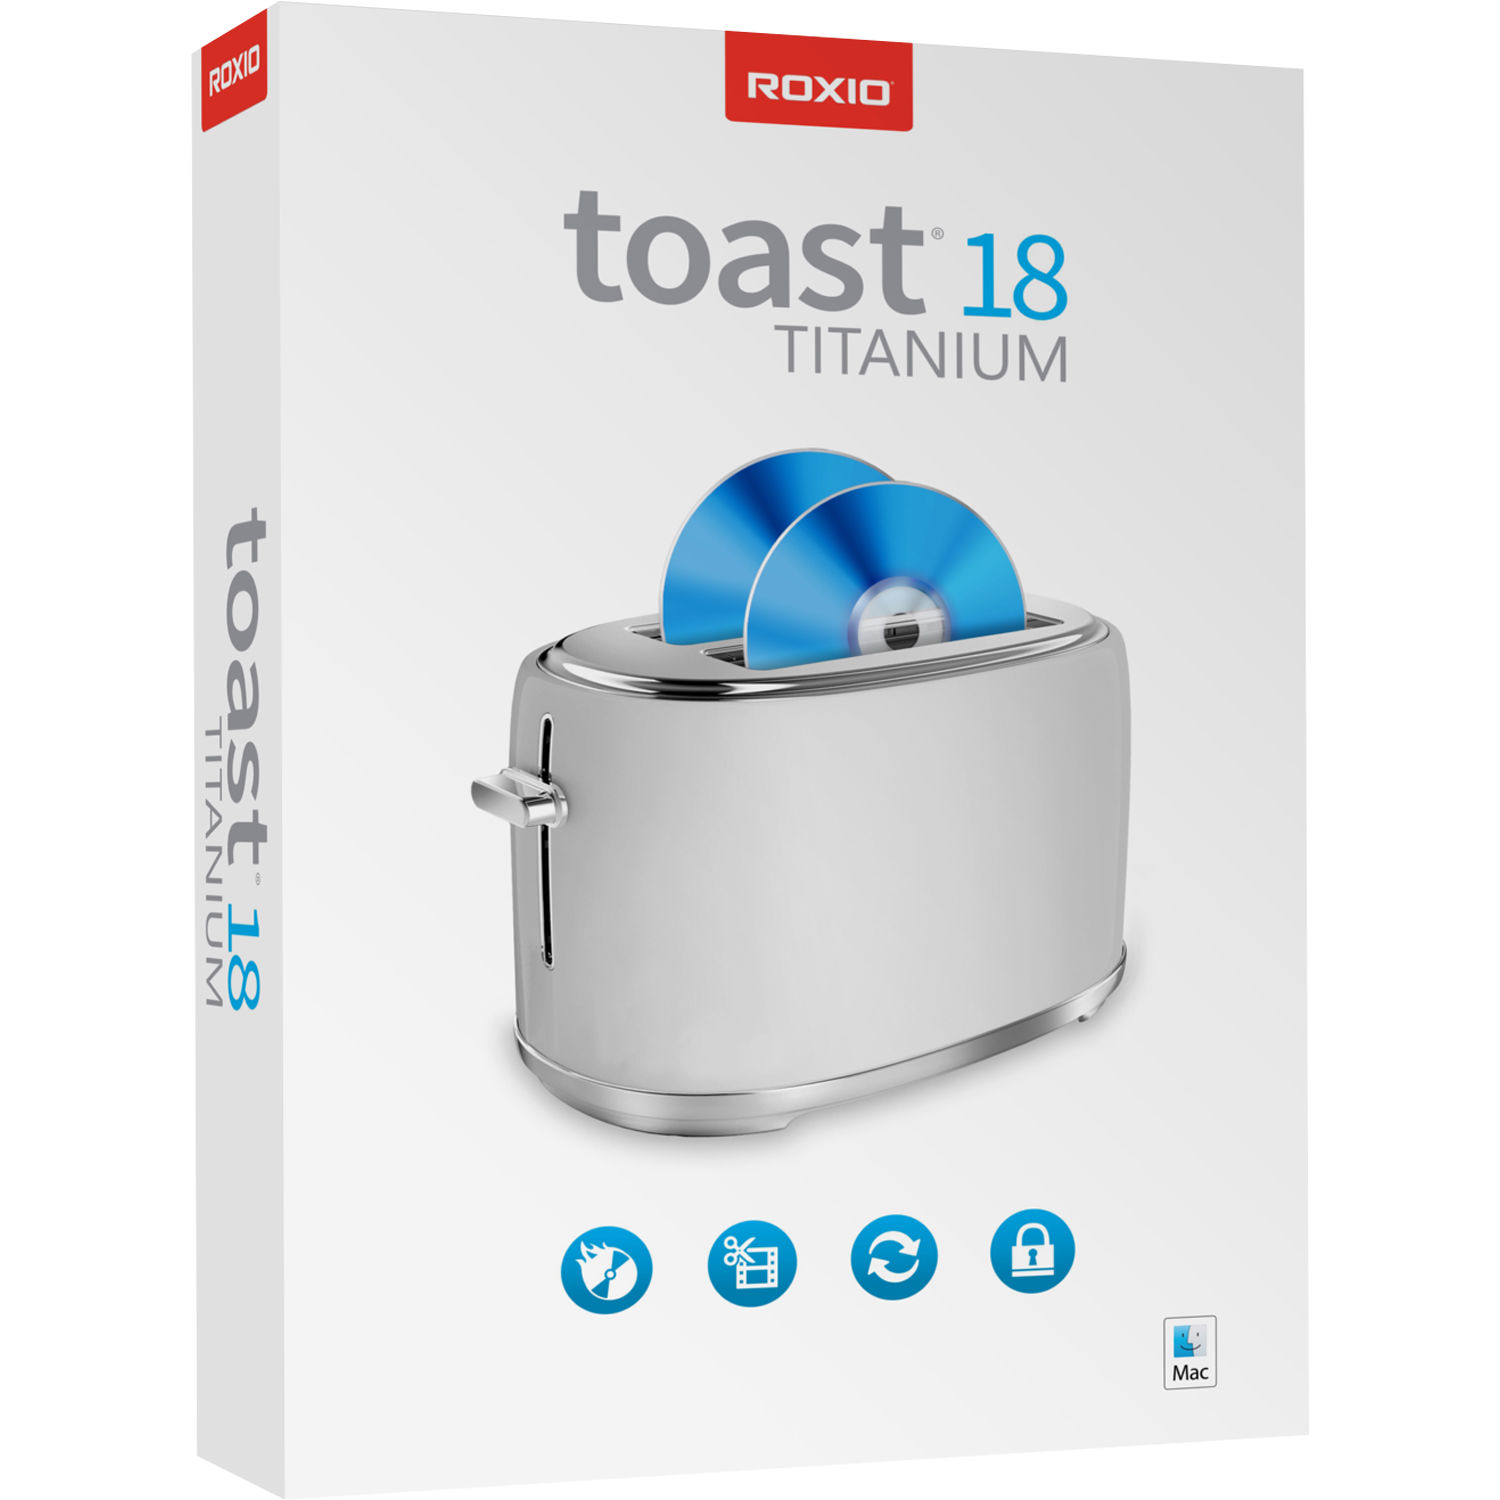 Toast 18 pro review